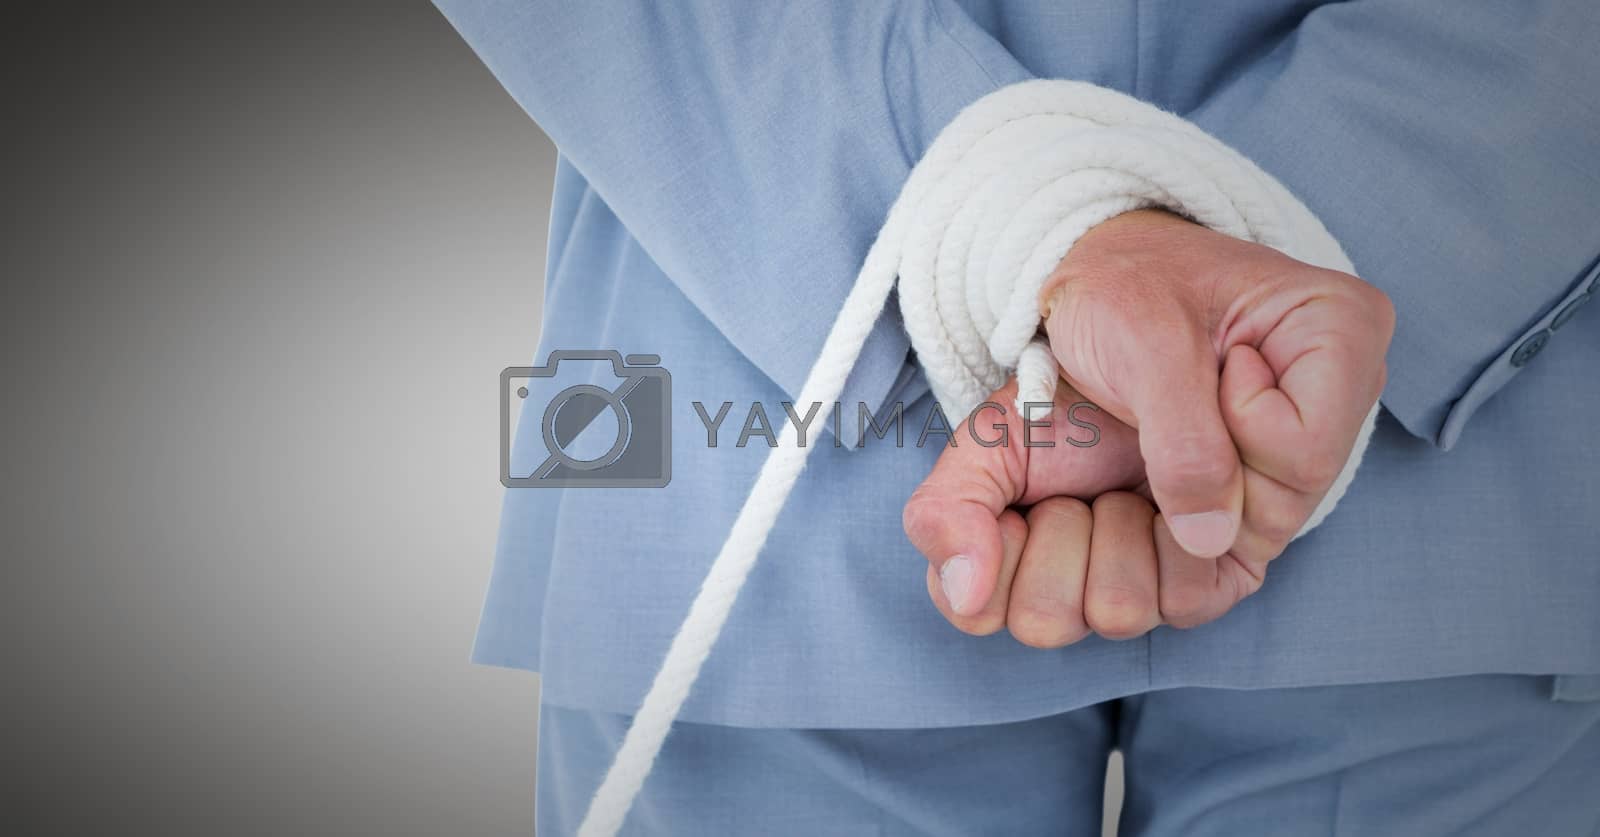 Royalty free image of Businessman hands tied up in rope by Wavebreakmedia